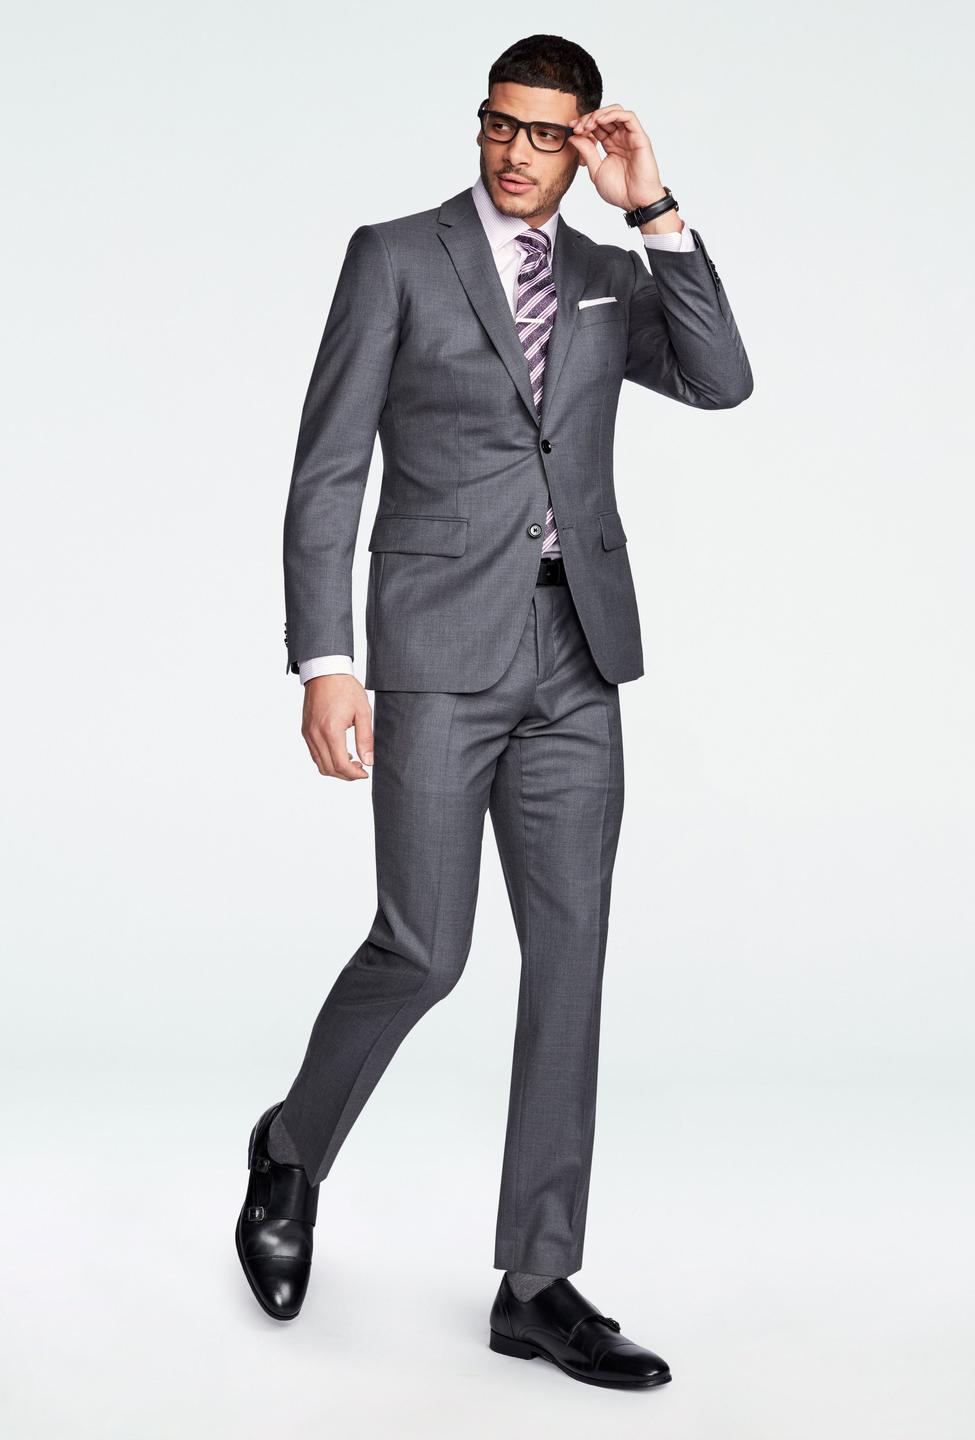 Gray suit - Solid Design from Luxury Indochino Collection